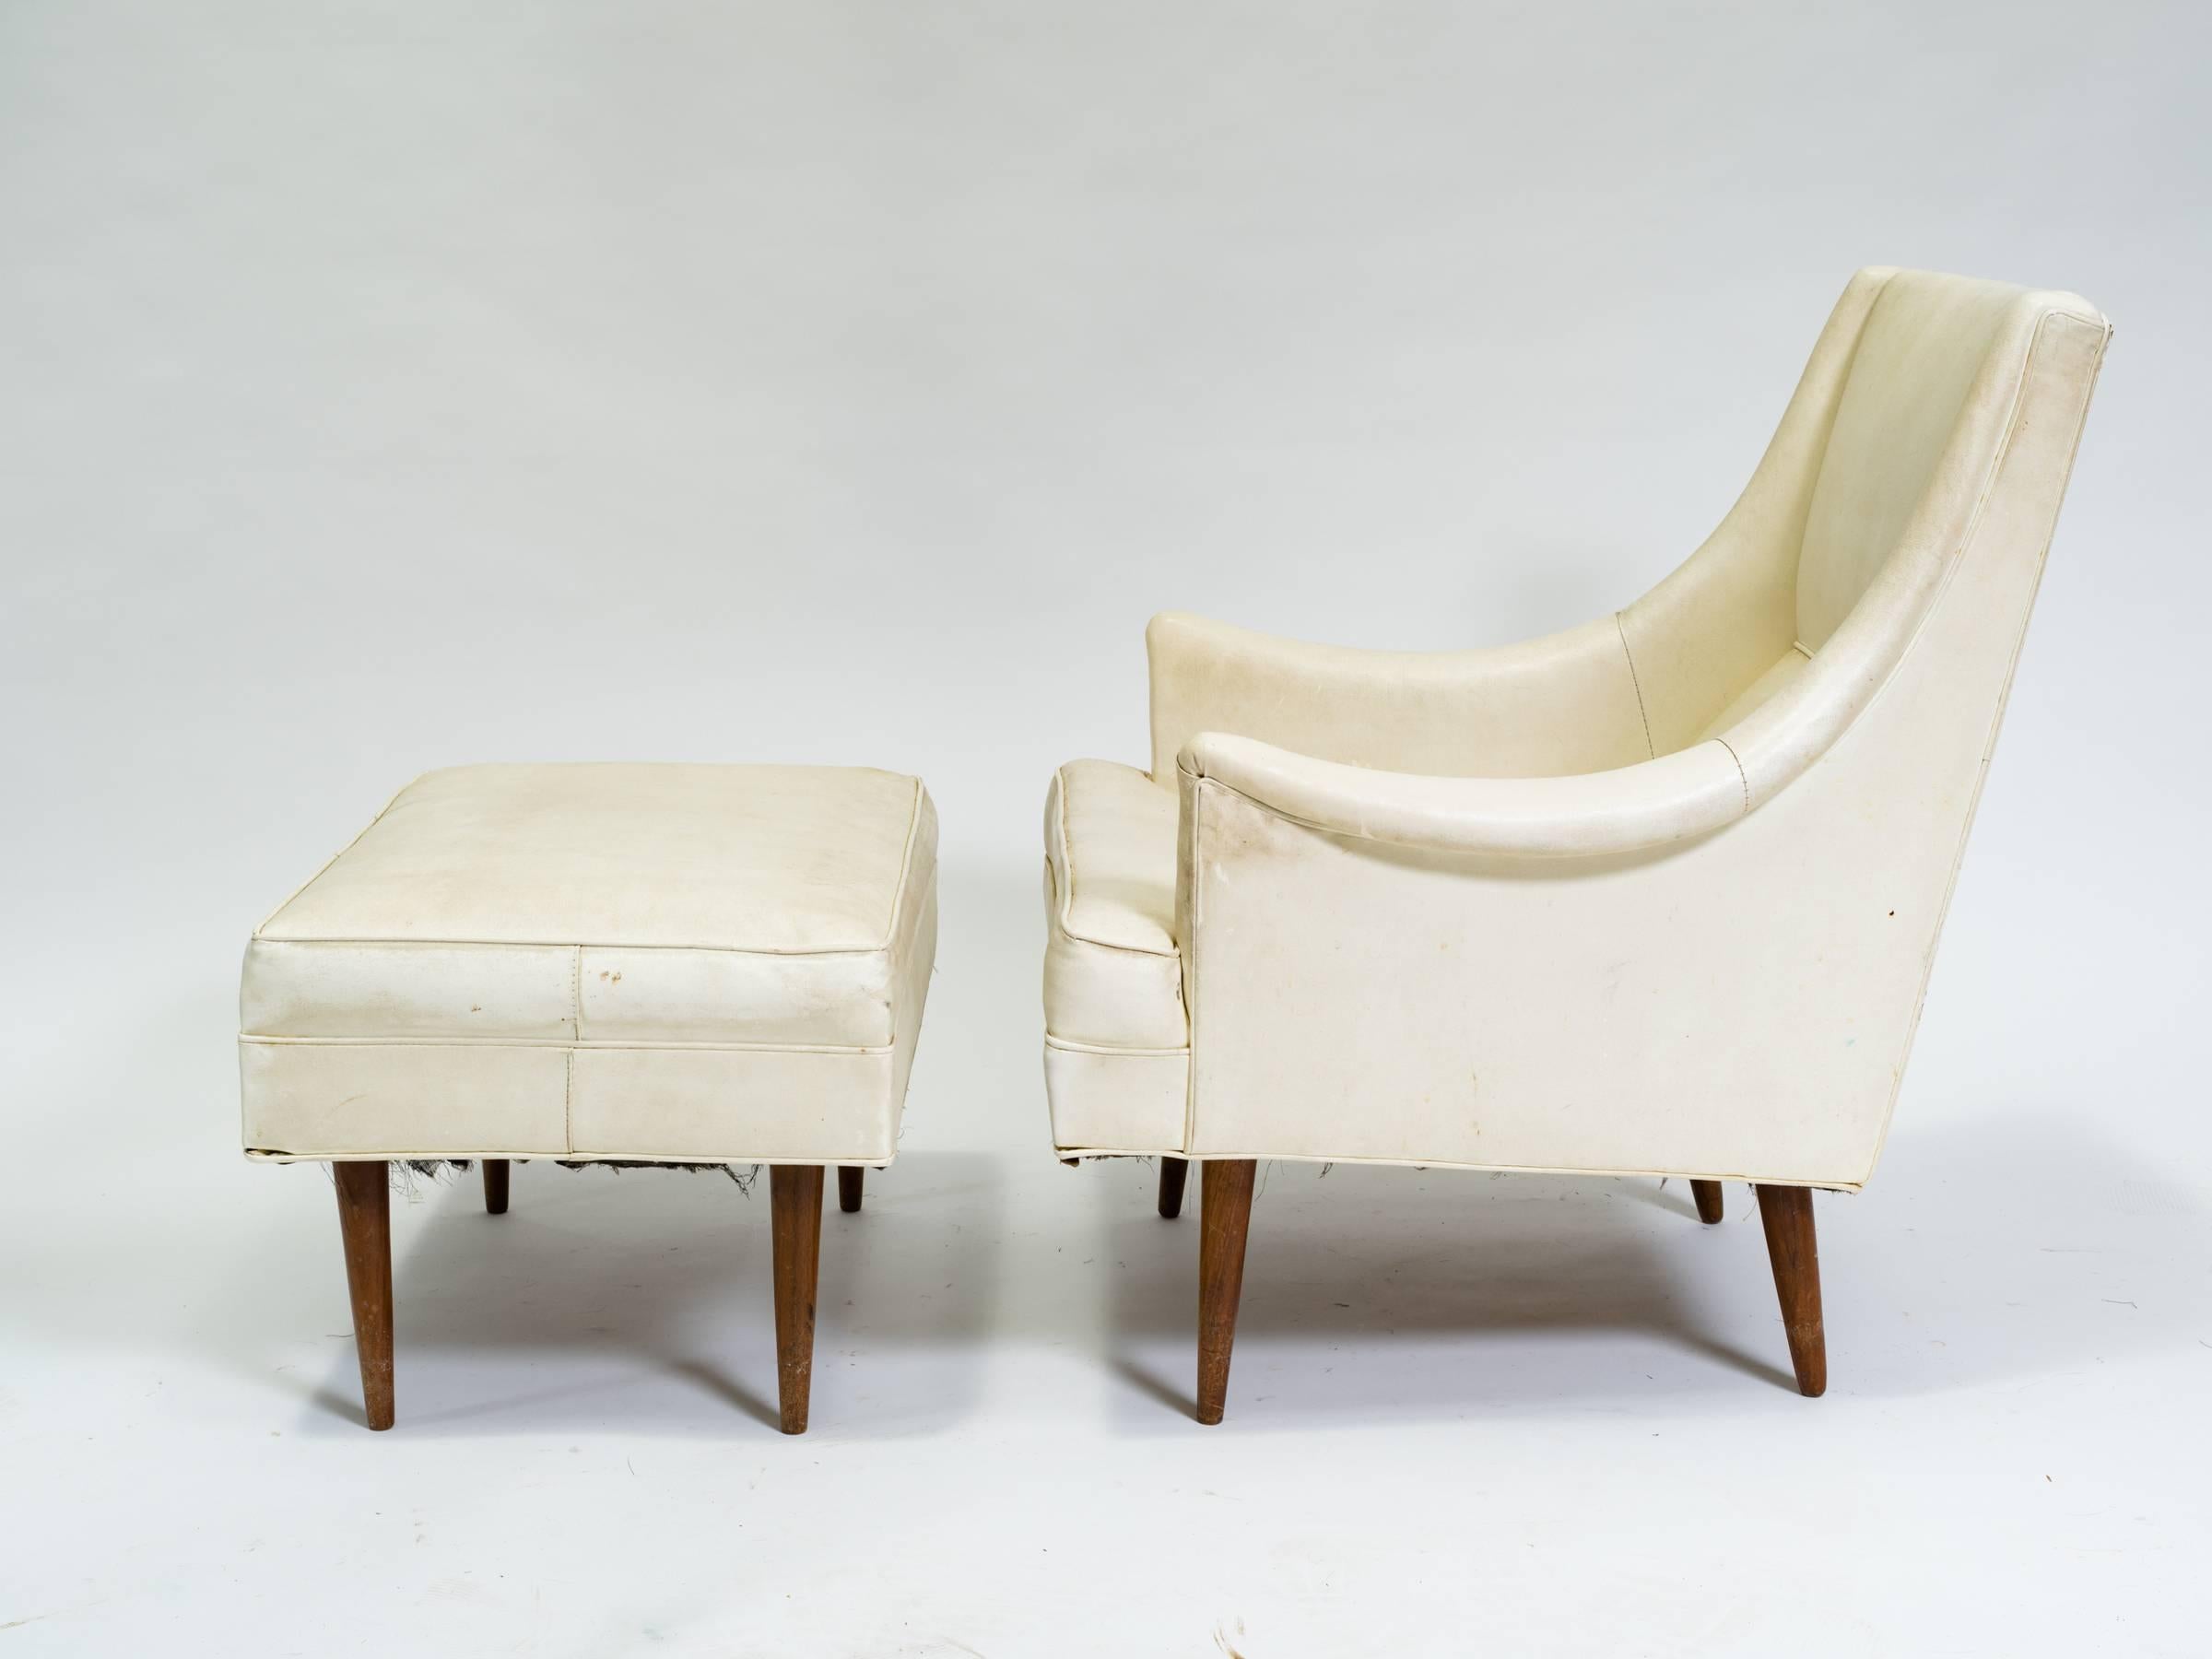 Late 20th Century Milo Baughman Chair and Ottoman, Signed